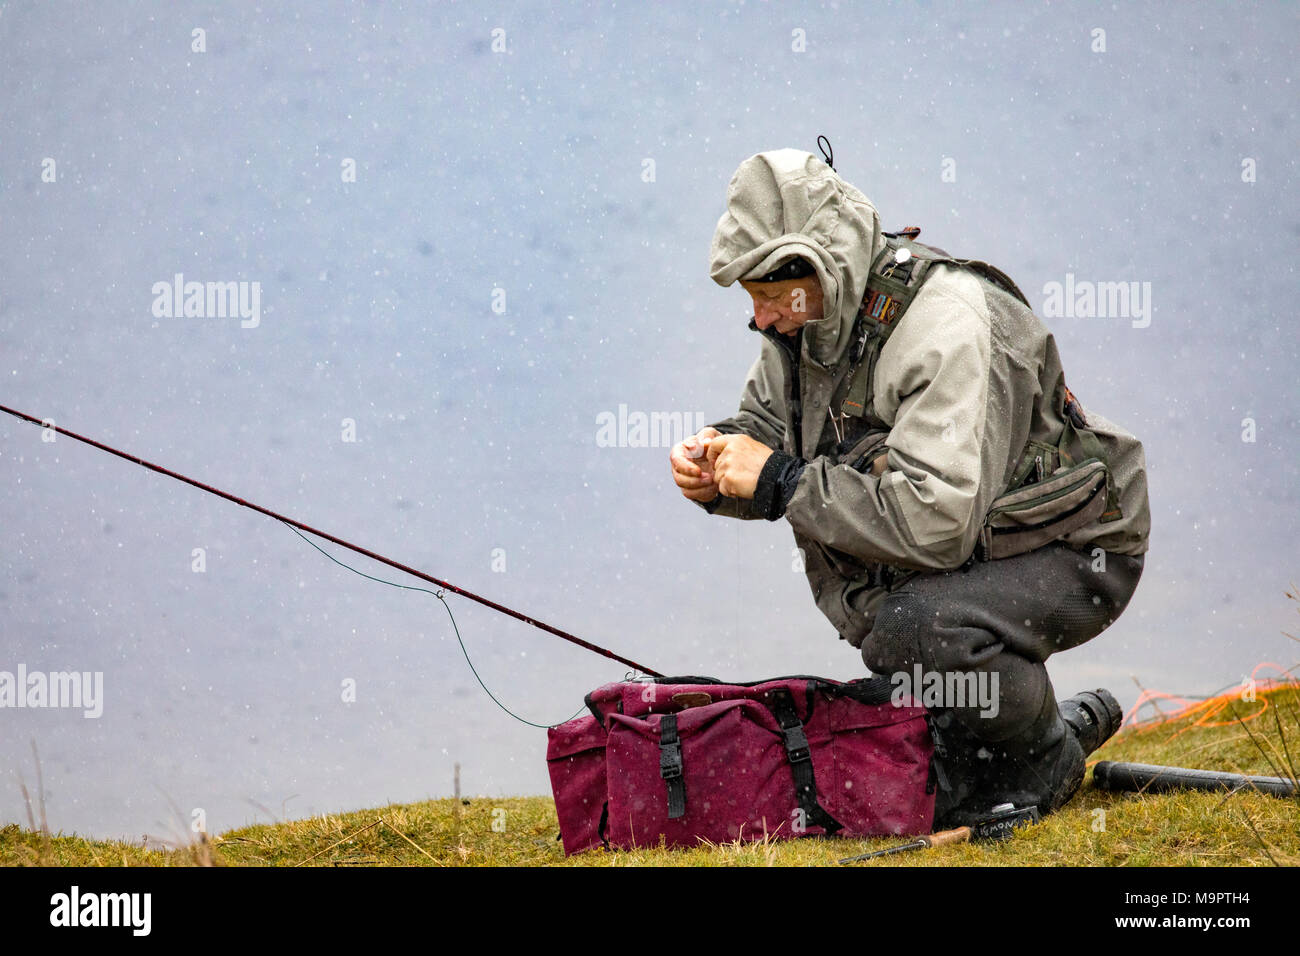 North Wales, UK 28th March 2018, UK Weather:  A further spell of snowfall and colder temperatures hits North Wales with further snow expected in the coming week. A fly fisherman tying on a new fly as the snow begins to fall on Llyn Brenig, Conwy County, North Wales © DGDImages/Alamy Live News Stock Photo